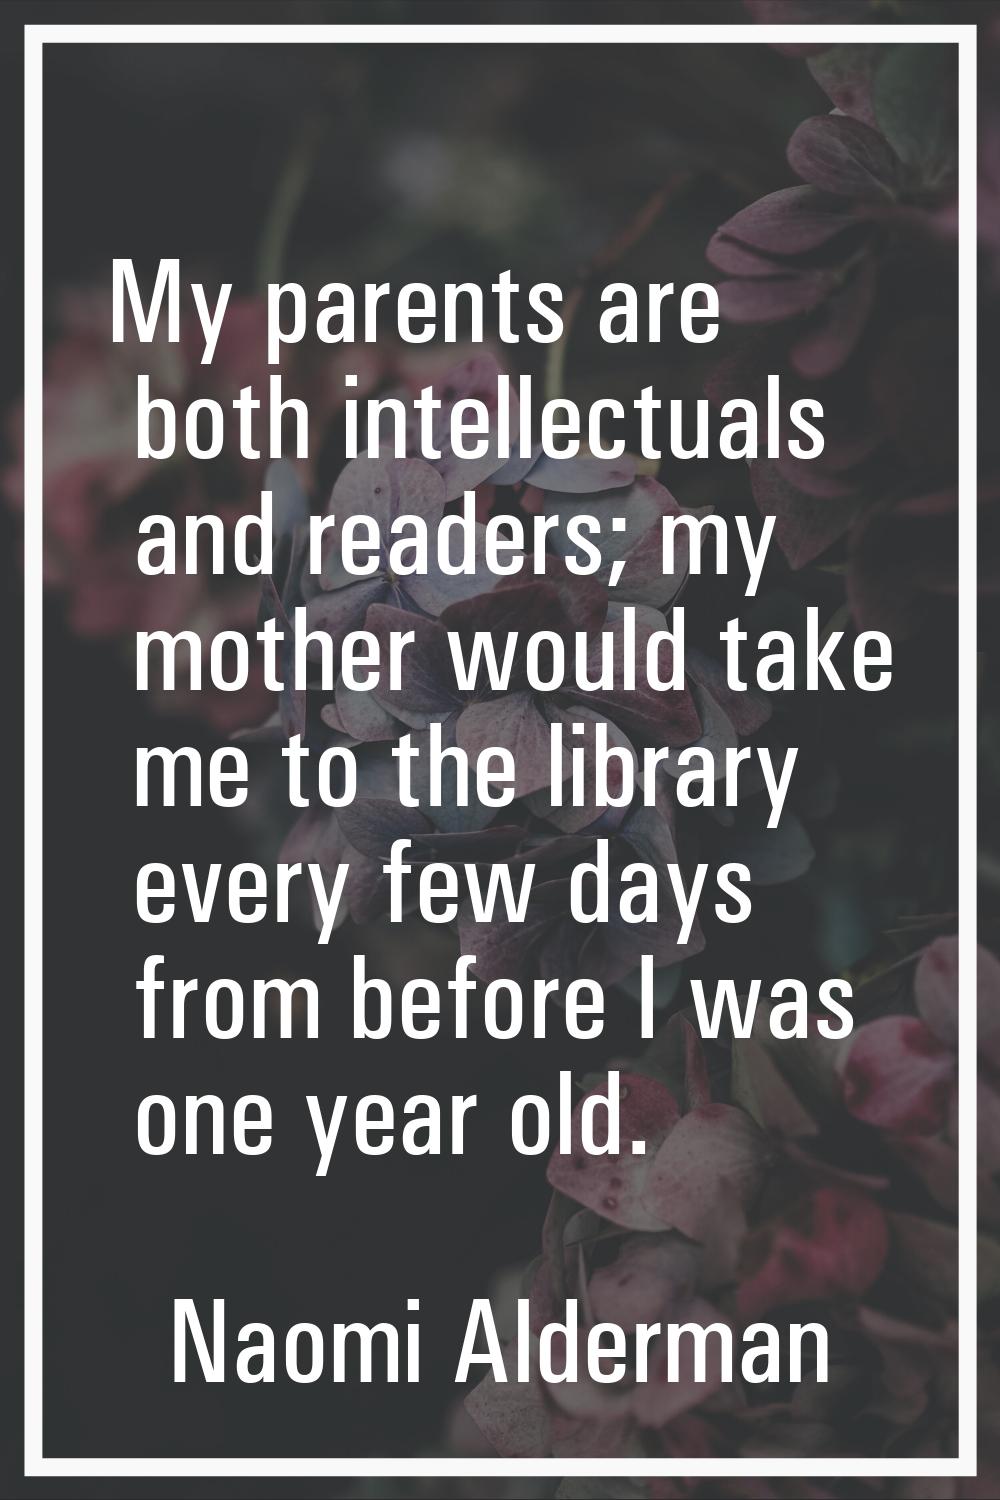 My parents are both intellectuals and readers; my mother would take me to the library every few day